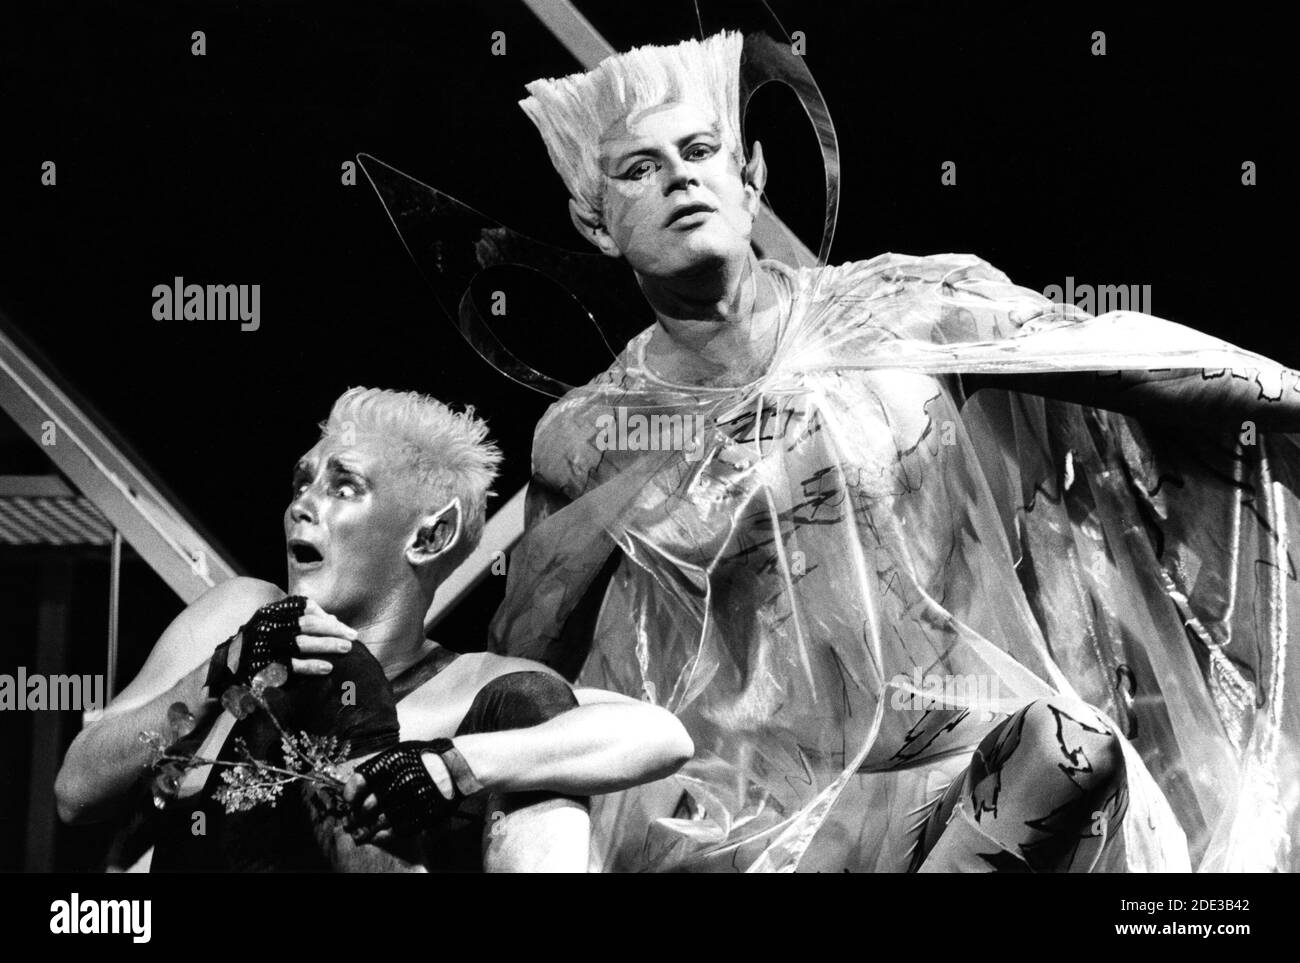 Mark Rylance (Puck), James Bowman (Oberon) in A MIDSUMMER NIGHT'S DREAM by Benjamin Britten after Shakespeare at the The Royal Opera, Covent Garden, London WC2  17/06/1986  music: Benjamin Britten  libretto: Benjamin Britten & Peter Pears, conductor: Roderick Brydon  design: Robin Don  lighting: John B. Read  choreographer: Terry Etheridge  director: Christopher Renshaw        (C) Donald Cooper/Photostage   photos@photostage.co.uk   ref/ Stock Photo